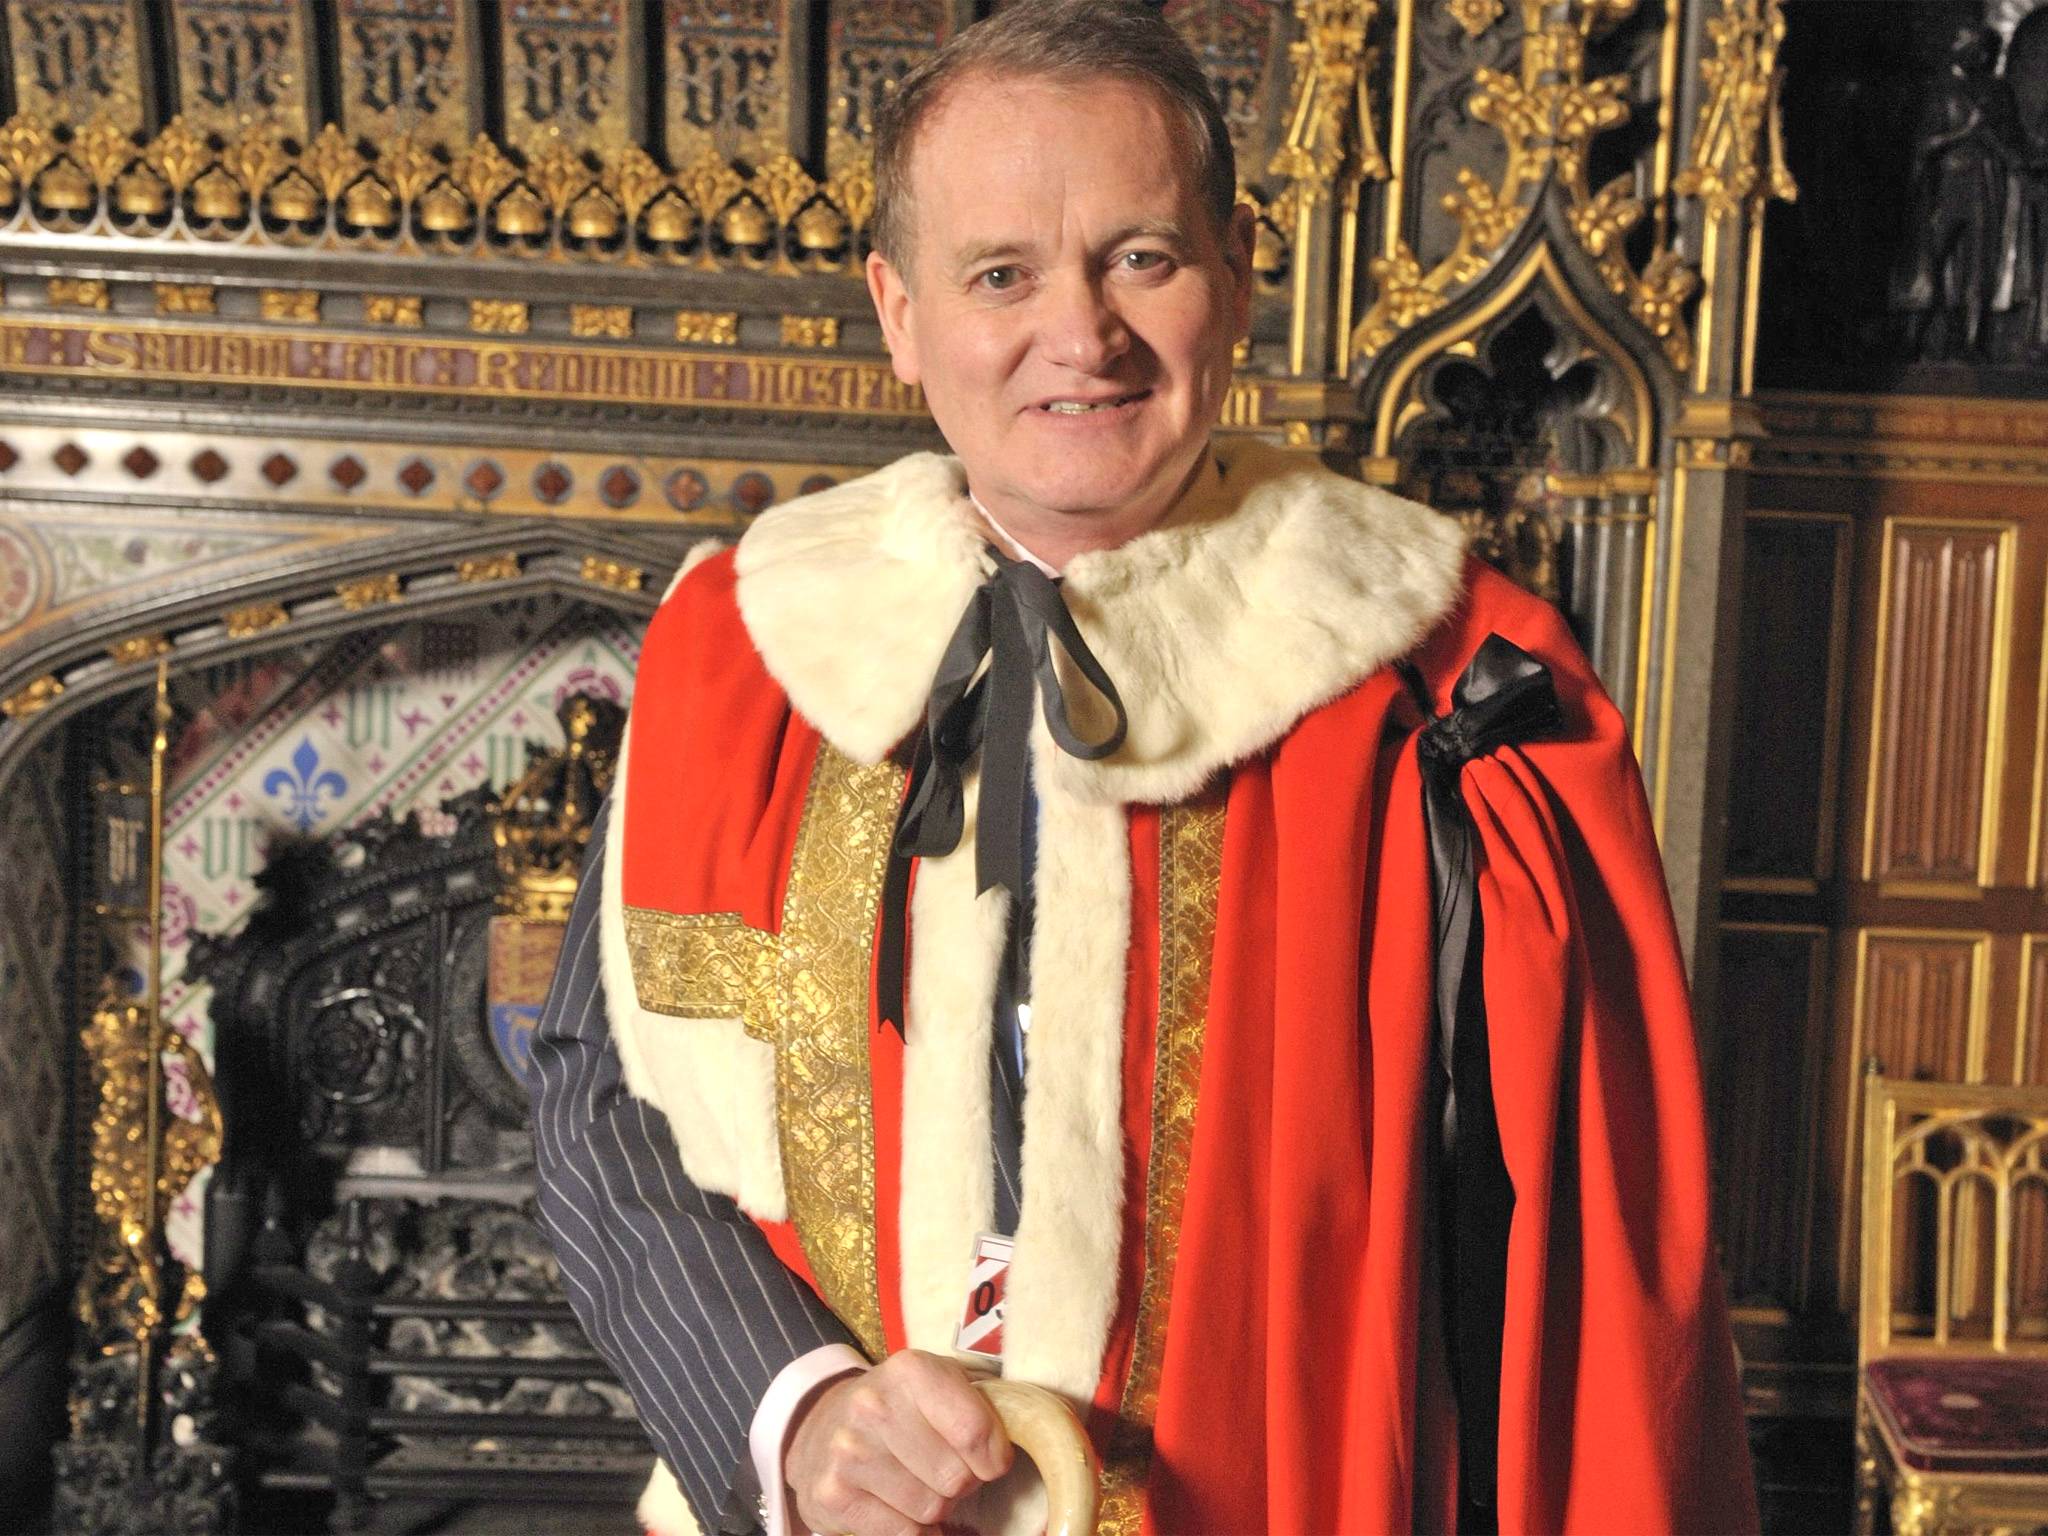 David Maclean on the day he was introduced to the House of Lords as Lord Blencathra of Penrith